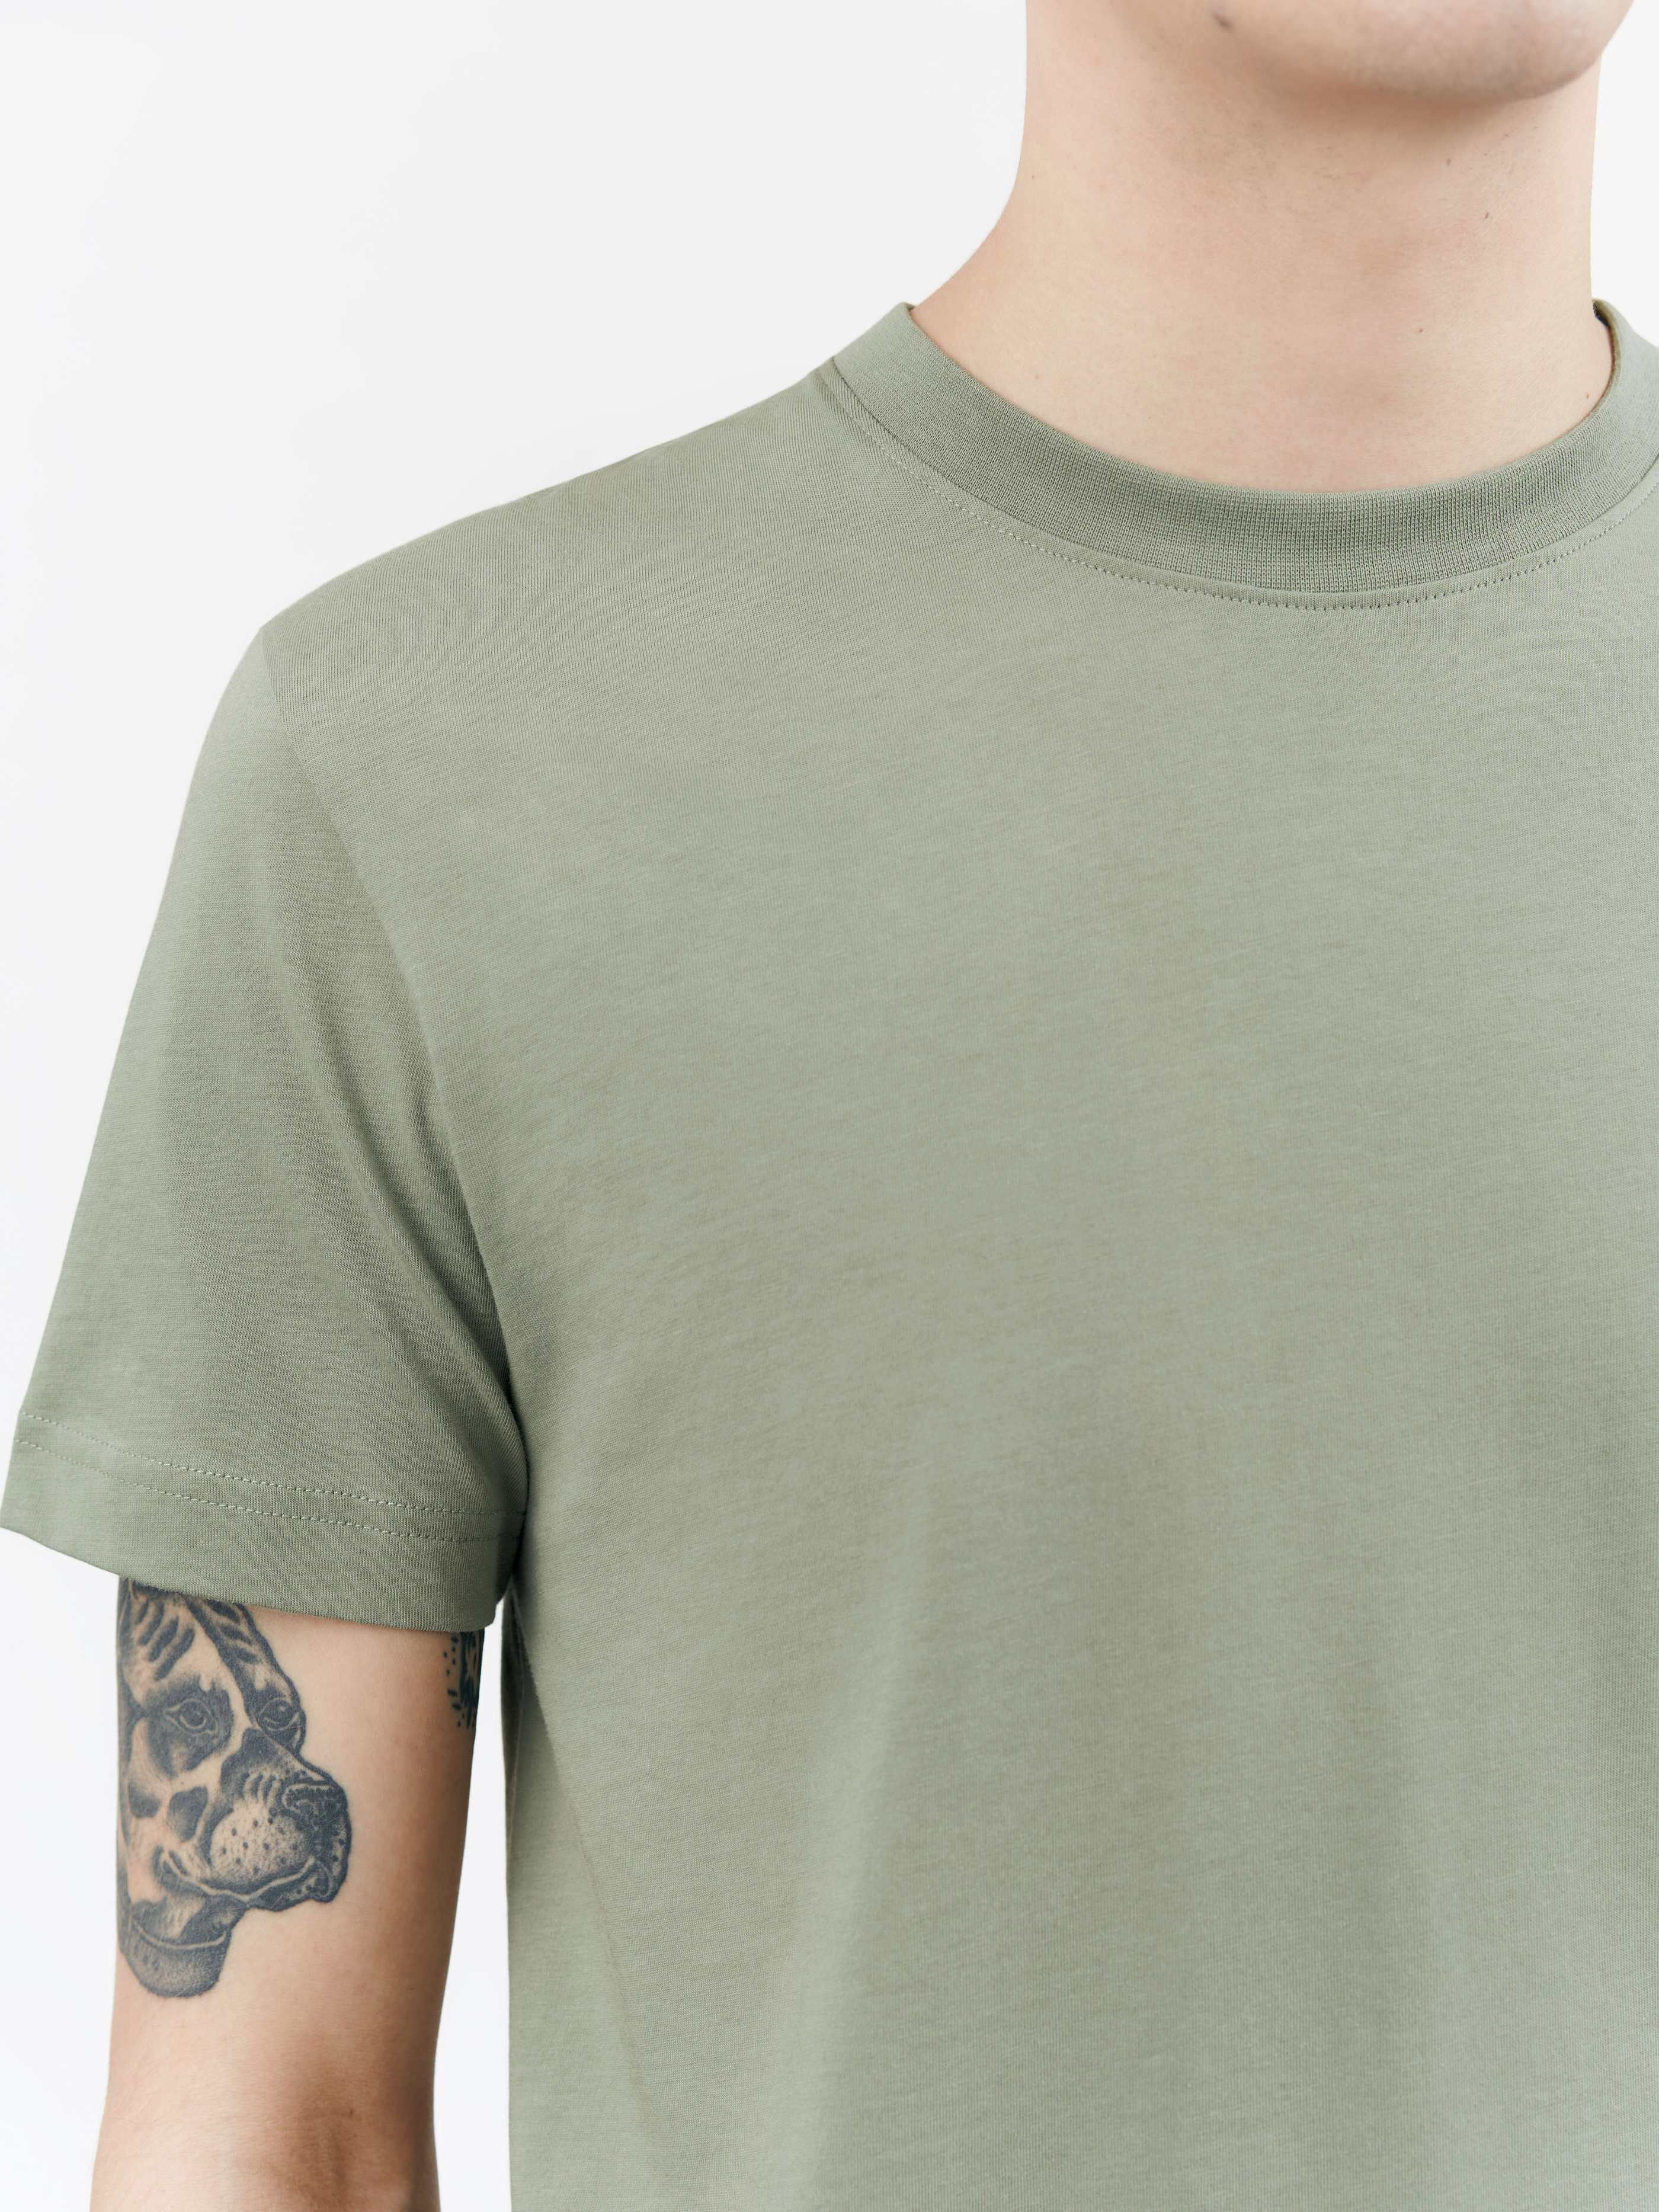 TIGER OF SWEDEN Dillan T-Shirt in Green T71996003 | Shop from eightywingold an official brand partner for Tiger of Sweden Canada and US.